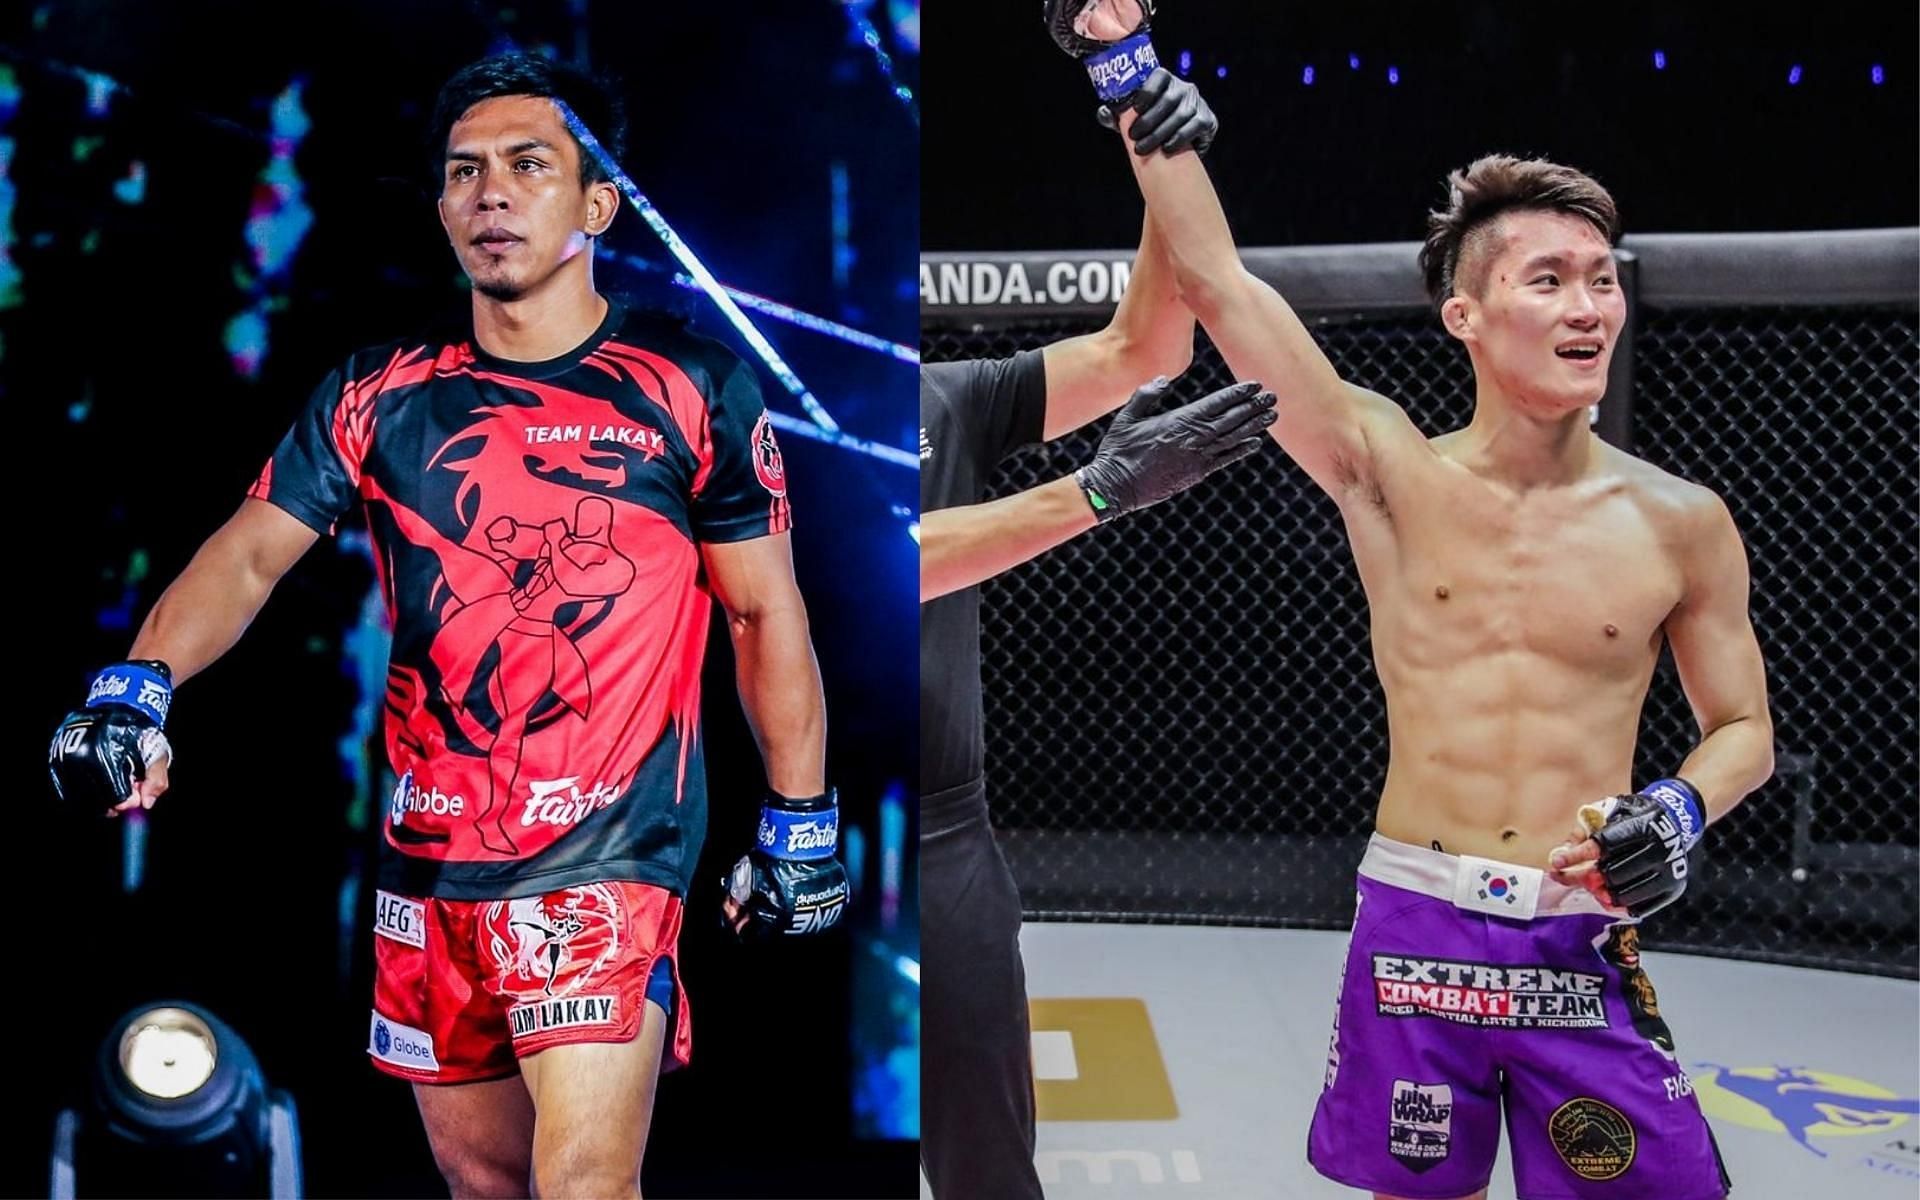 Kevin Belingon (left) will fight Kwon Won Il in the co-main event of ONE Championship: Winter Warriors II. (Images courtesy of ONE Championship)